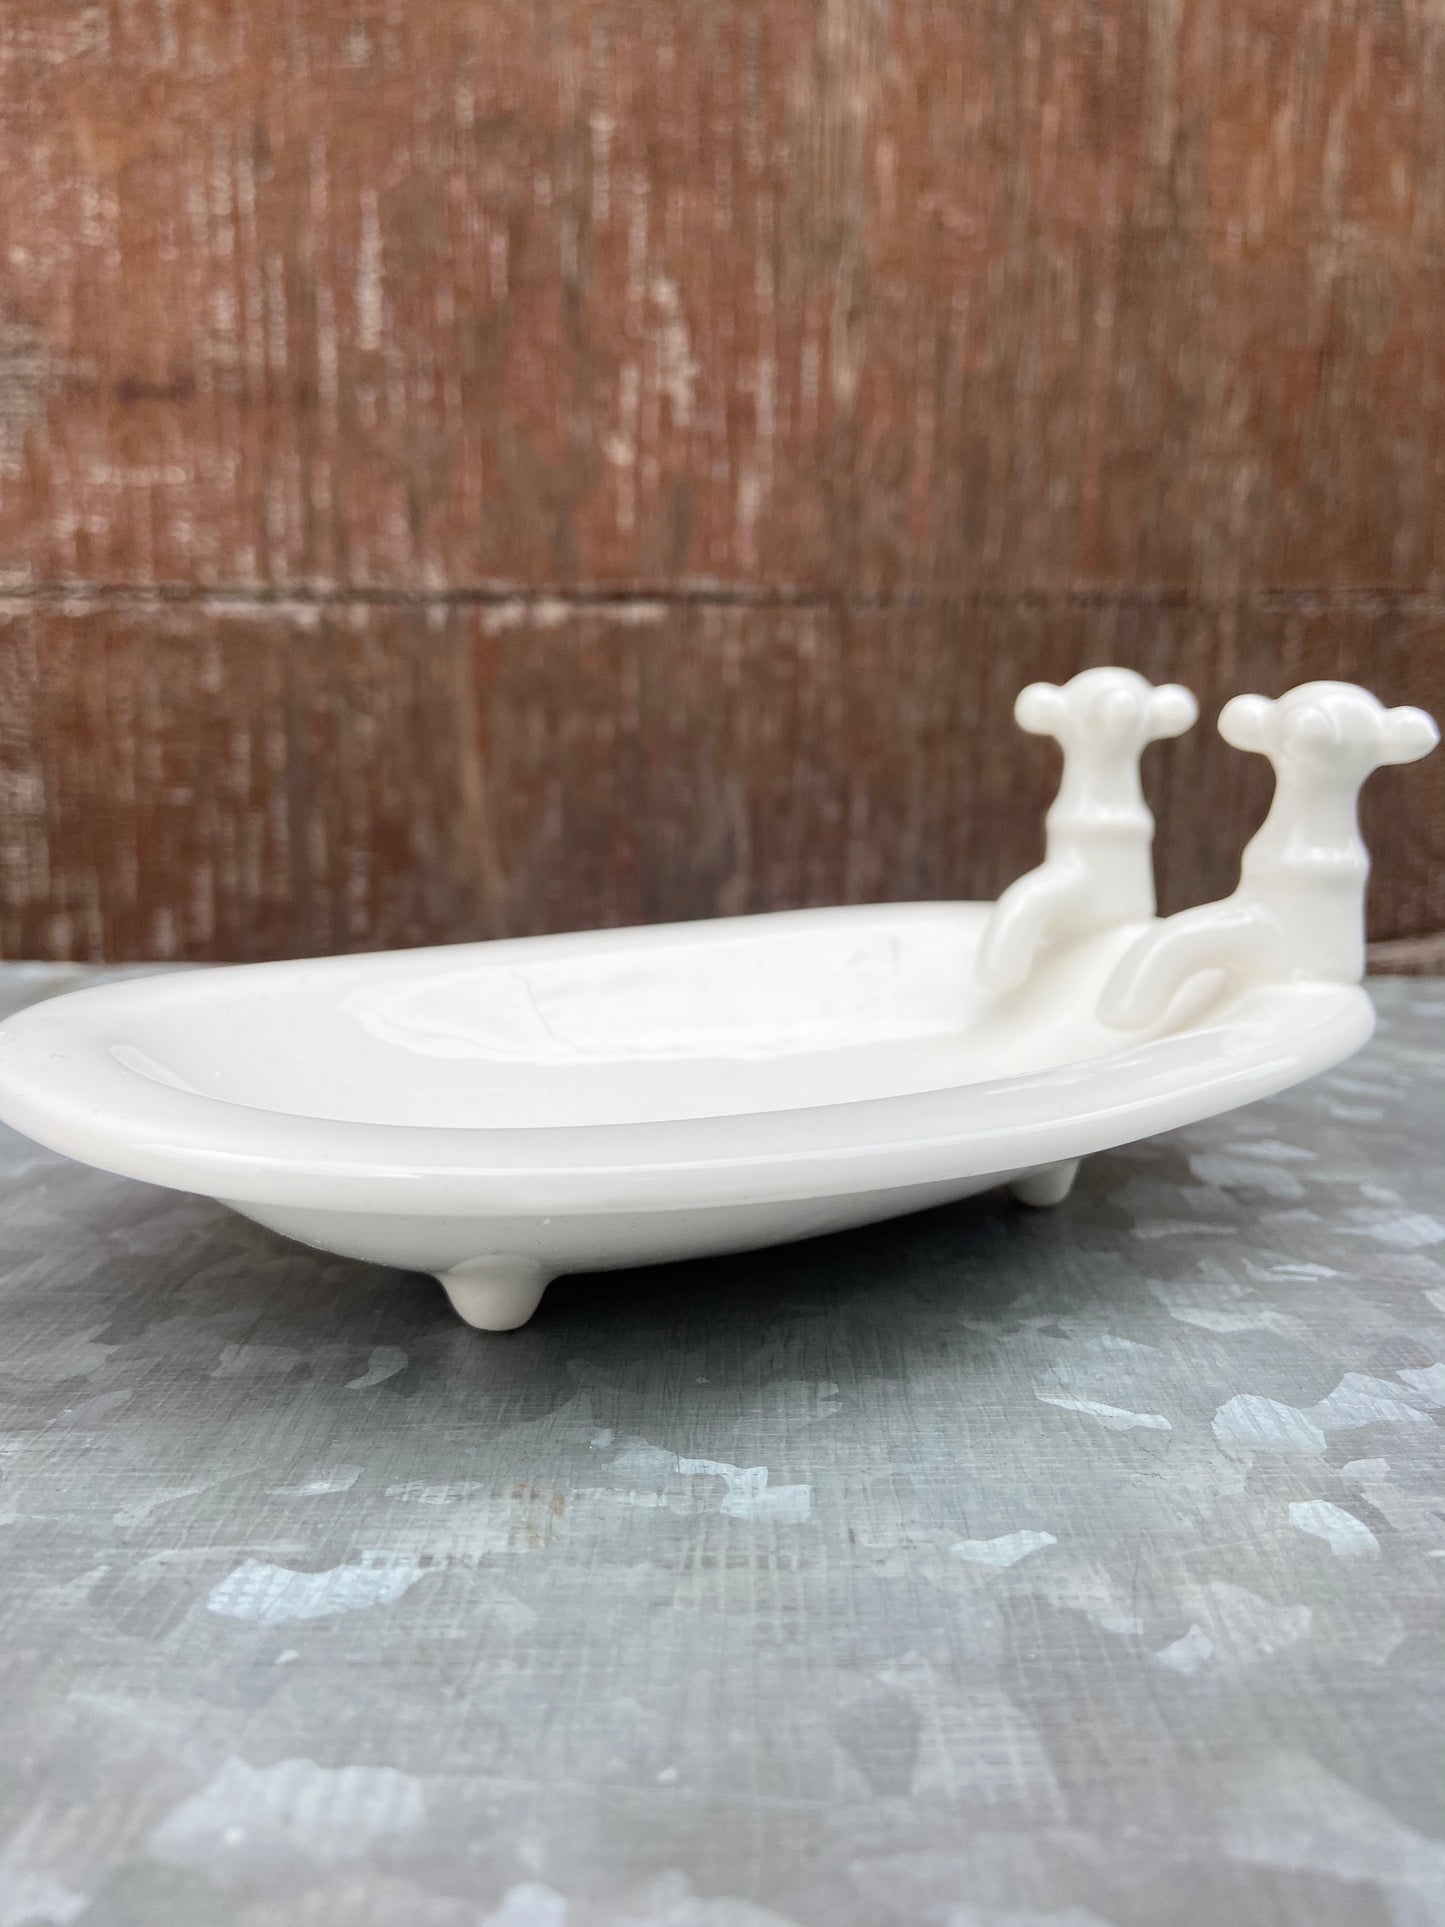 Adorable old style bathtub soap dish. This oval 6” long ceramic bathtub soap holder has a classic ivory finish and works great for the kitchen or bathroom, either for yourself or makes a terrific gift!